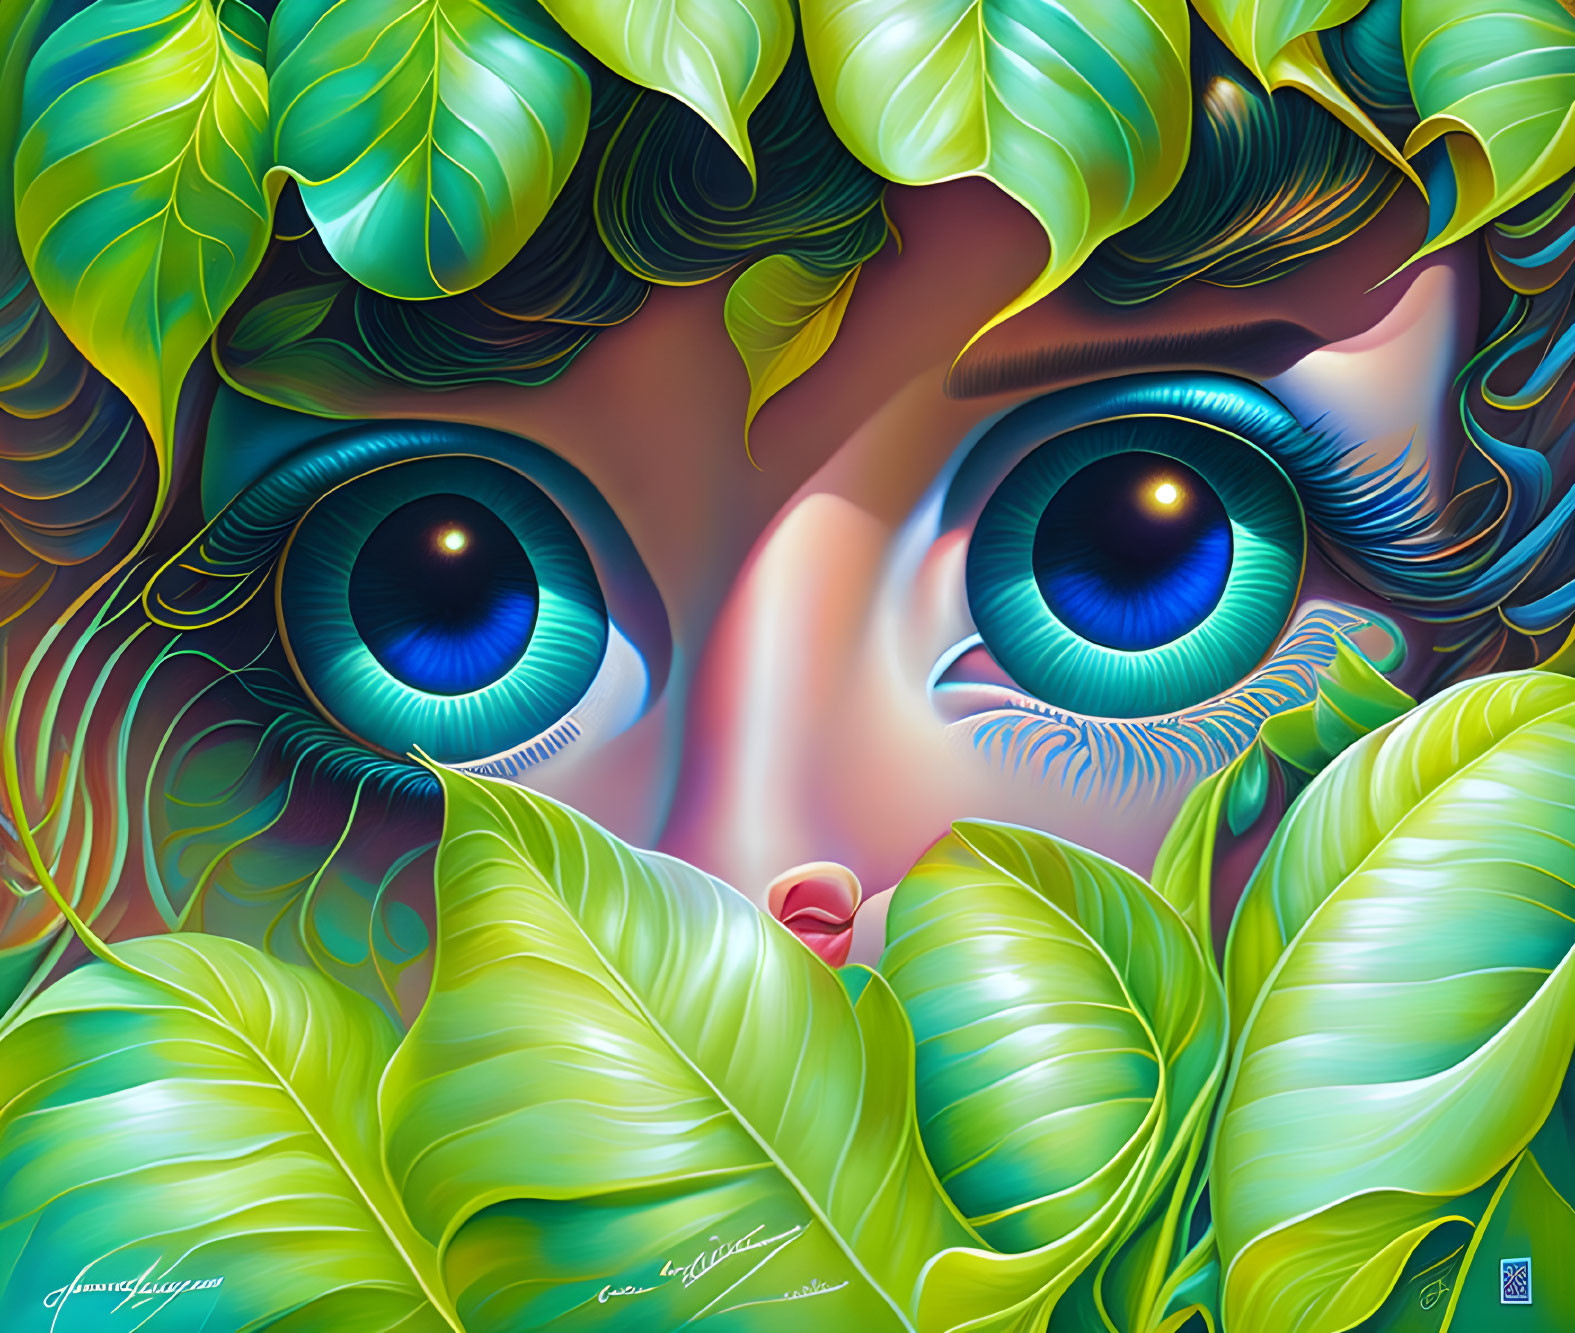 Colorful face in green leaves with blue eyes and red lips.